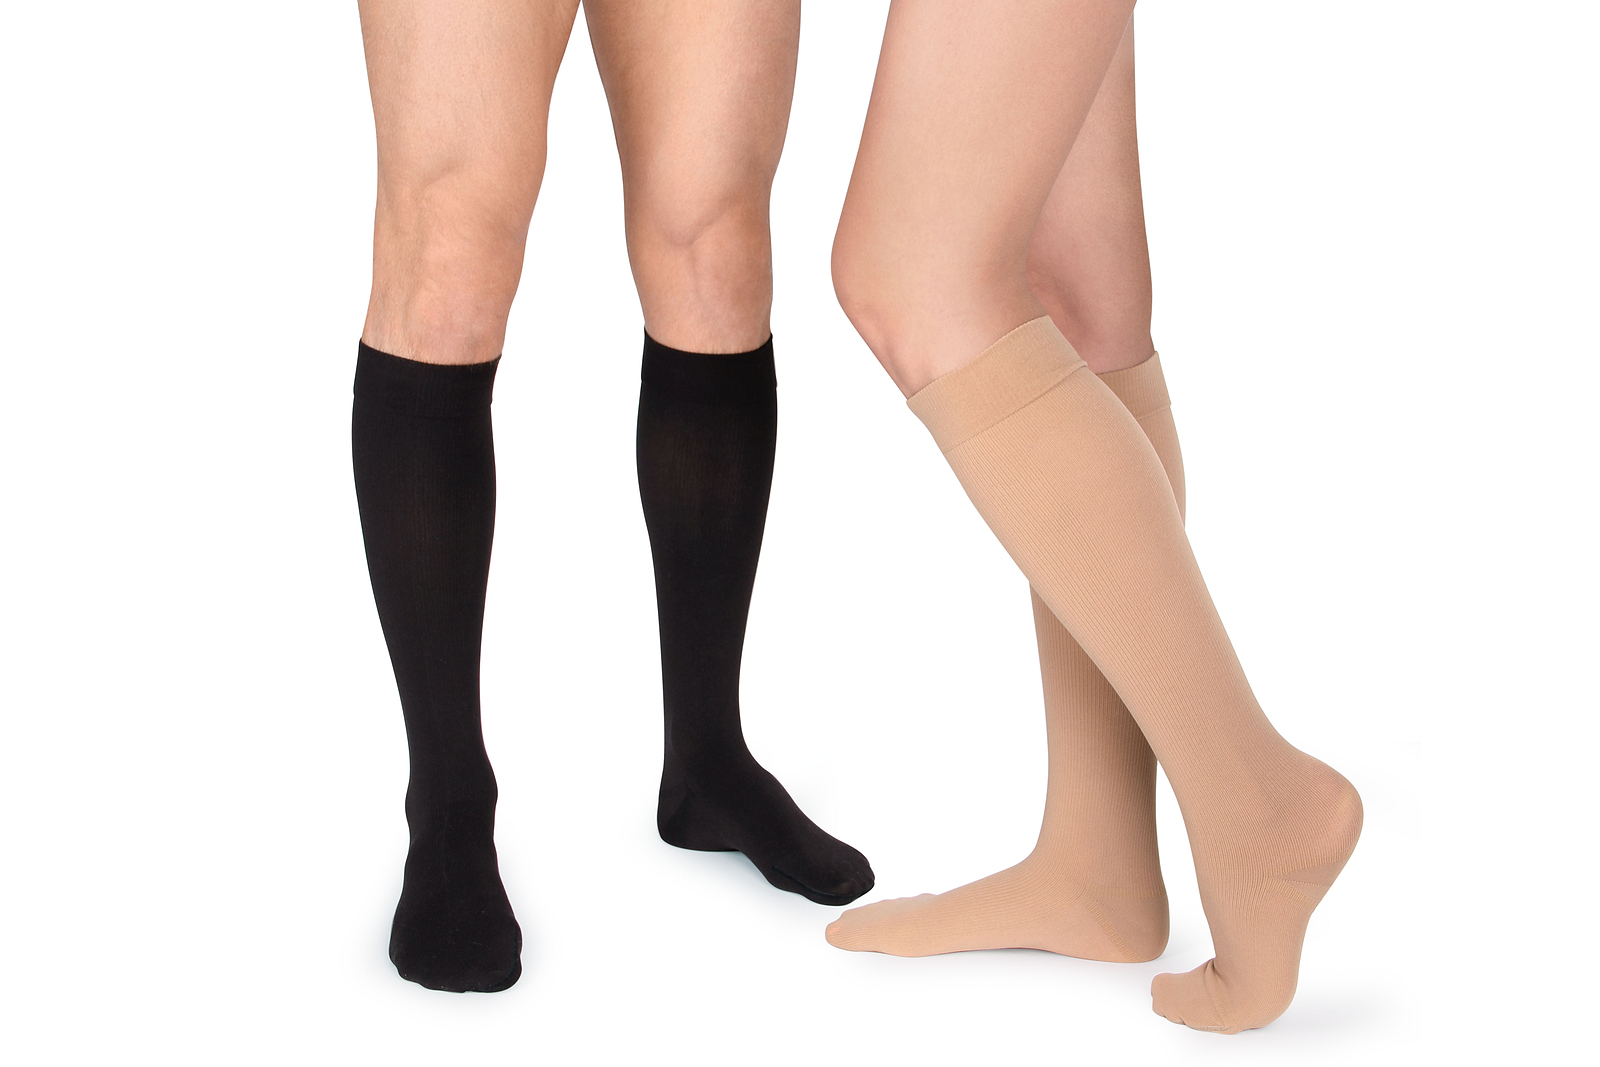 compression for calf implant removal surgery